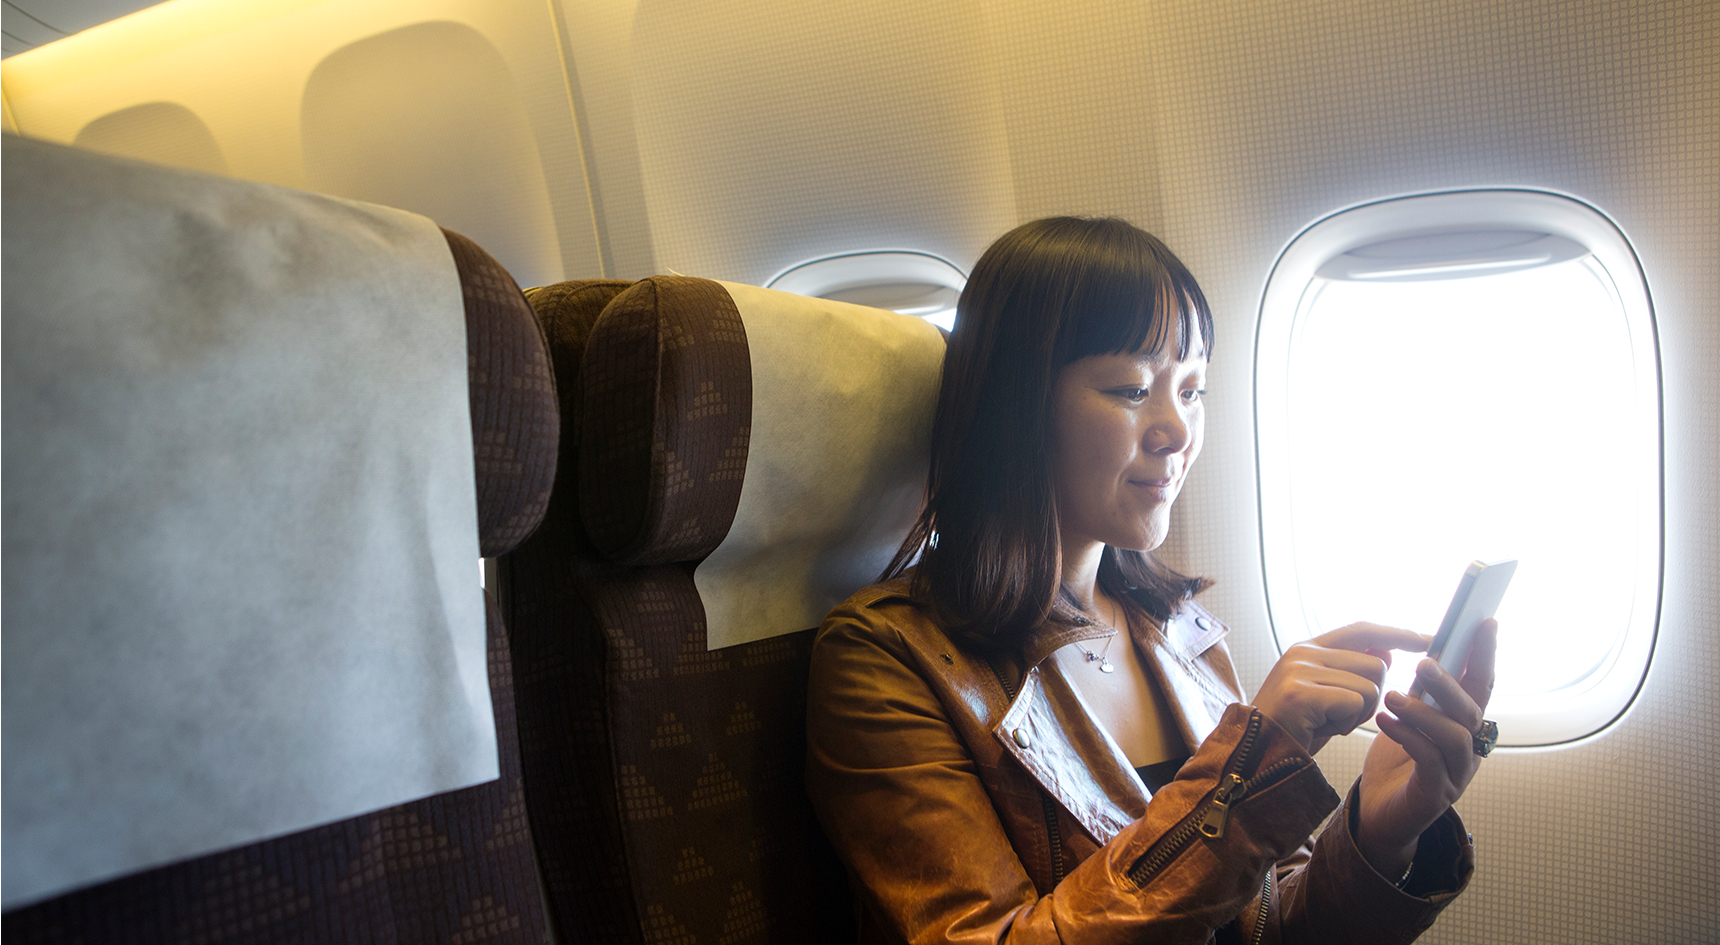 Woman looking at smartphone on a plane